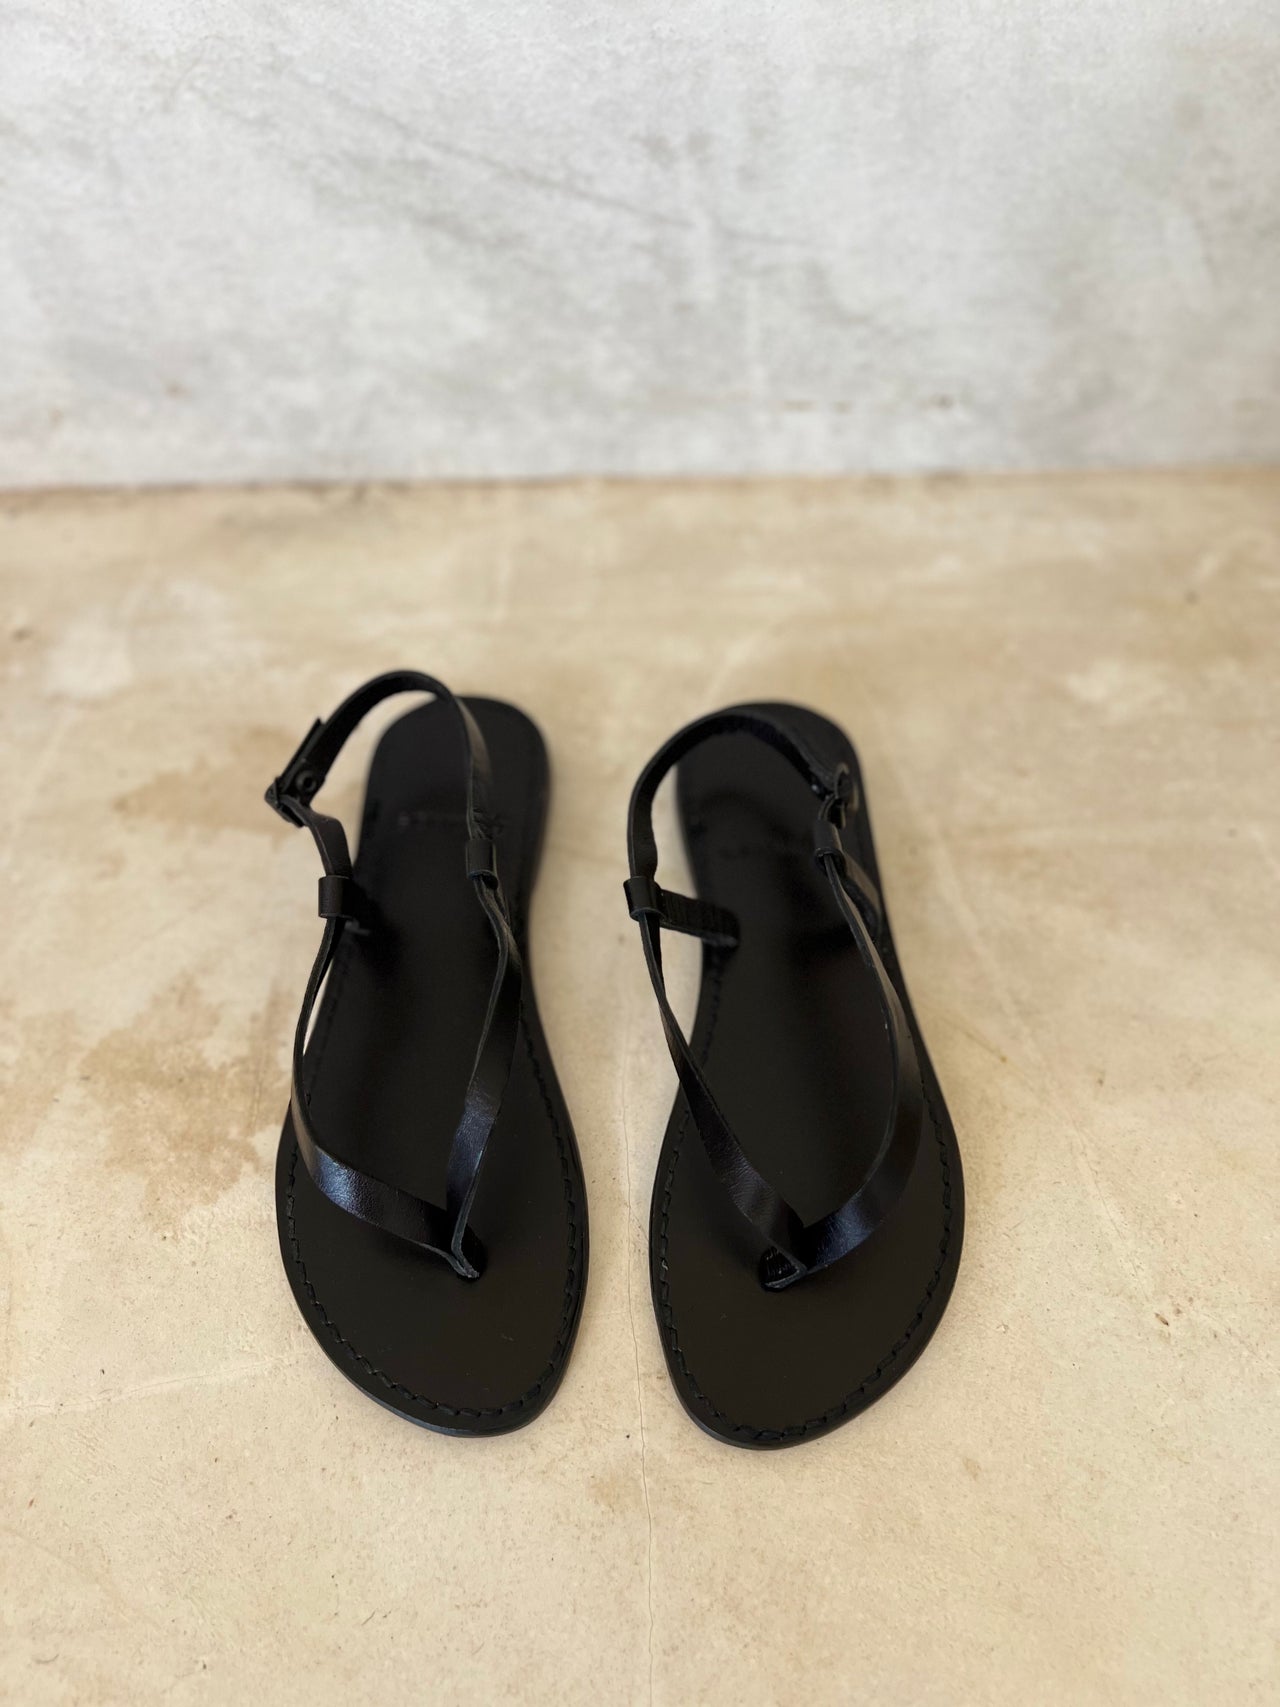 by James Anna Sandal in Black